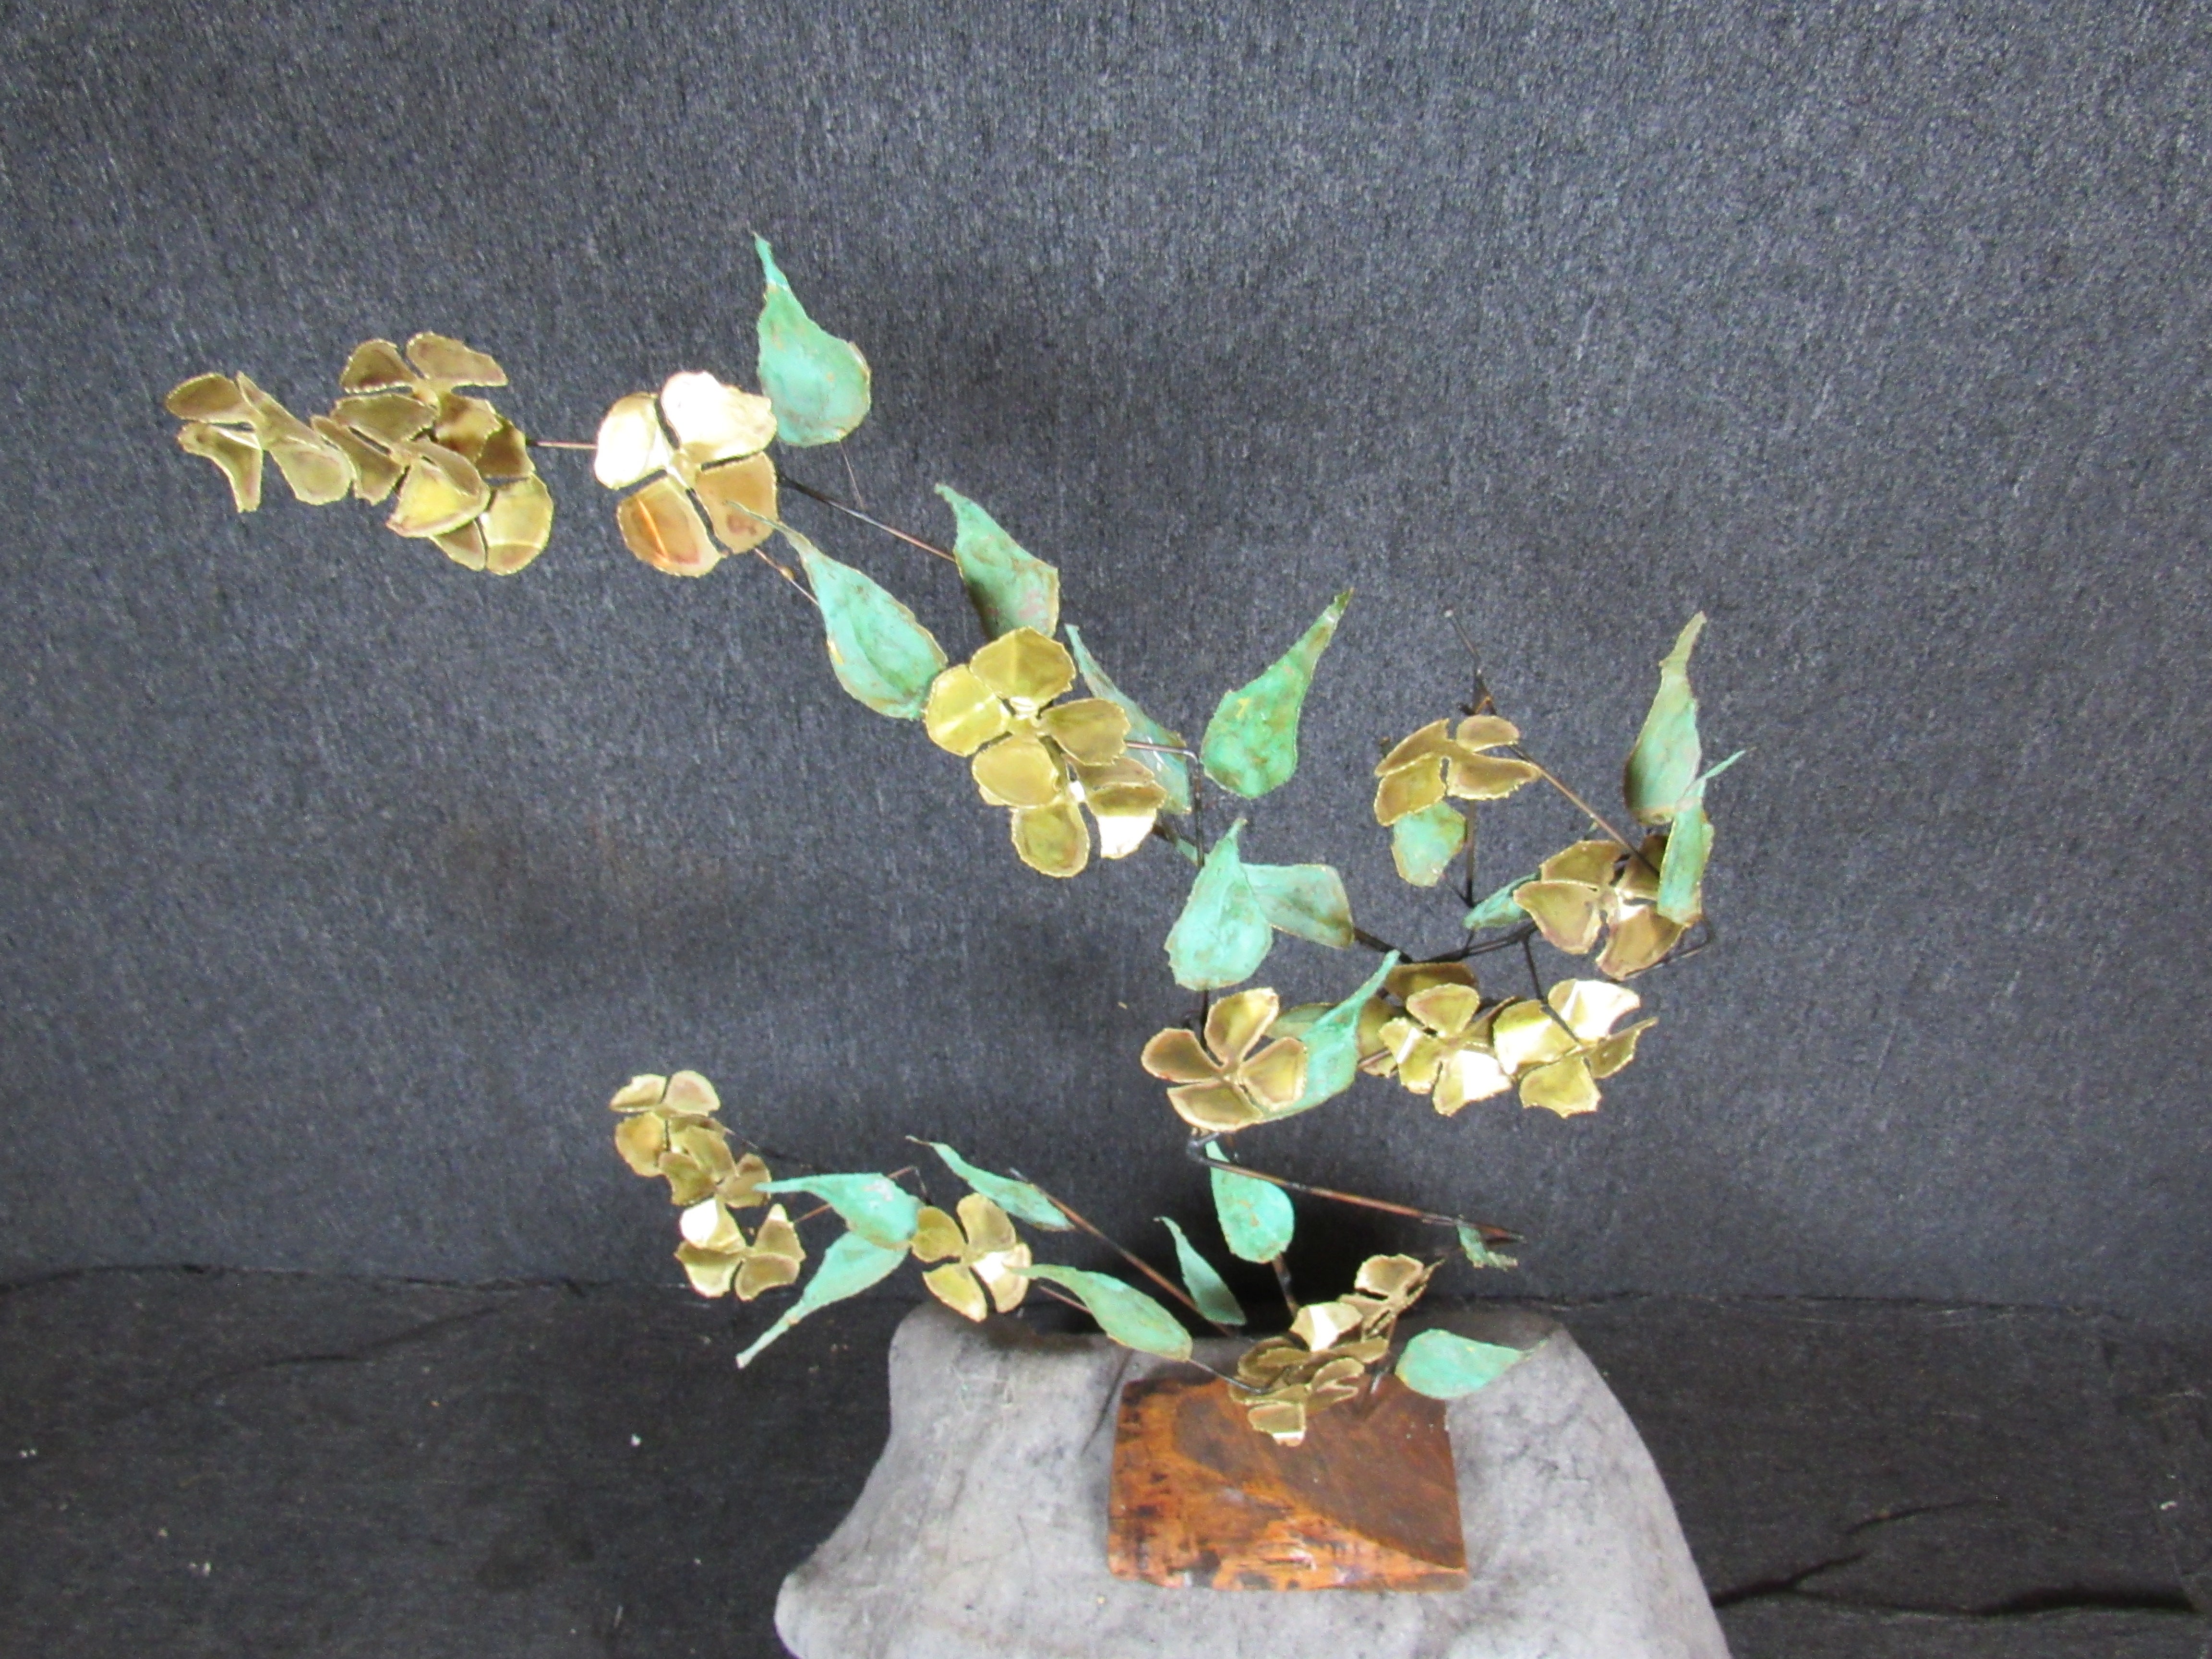 Finally, a house plant that doesn't need watering! This attractive enameled copper & brass bonsai tree sculpture, in the style of Curtis Jeré, is sure to impress. A perfect accent for any room in the home, office, or even somewhere else. Please